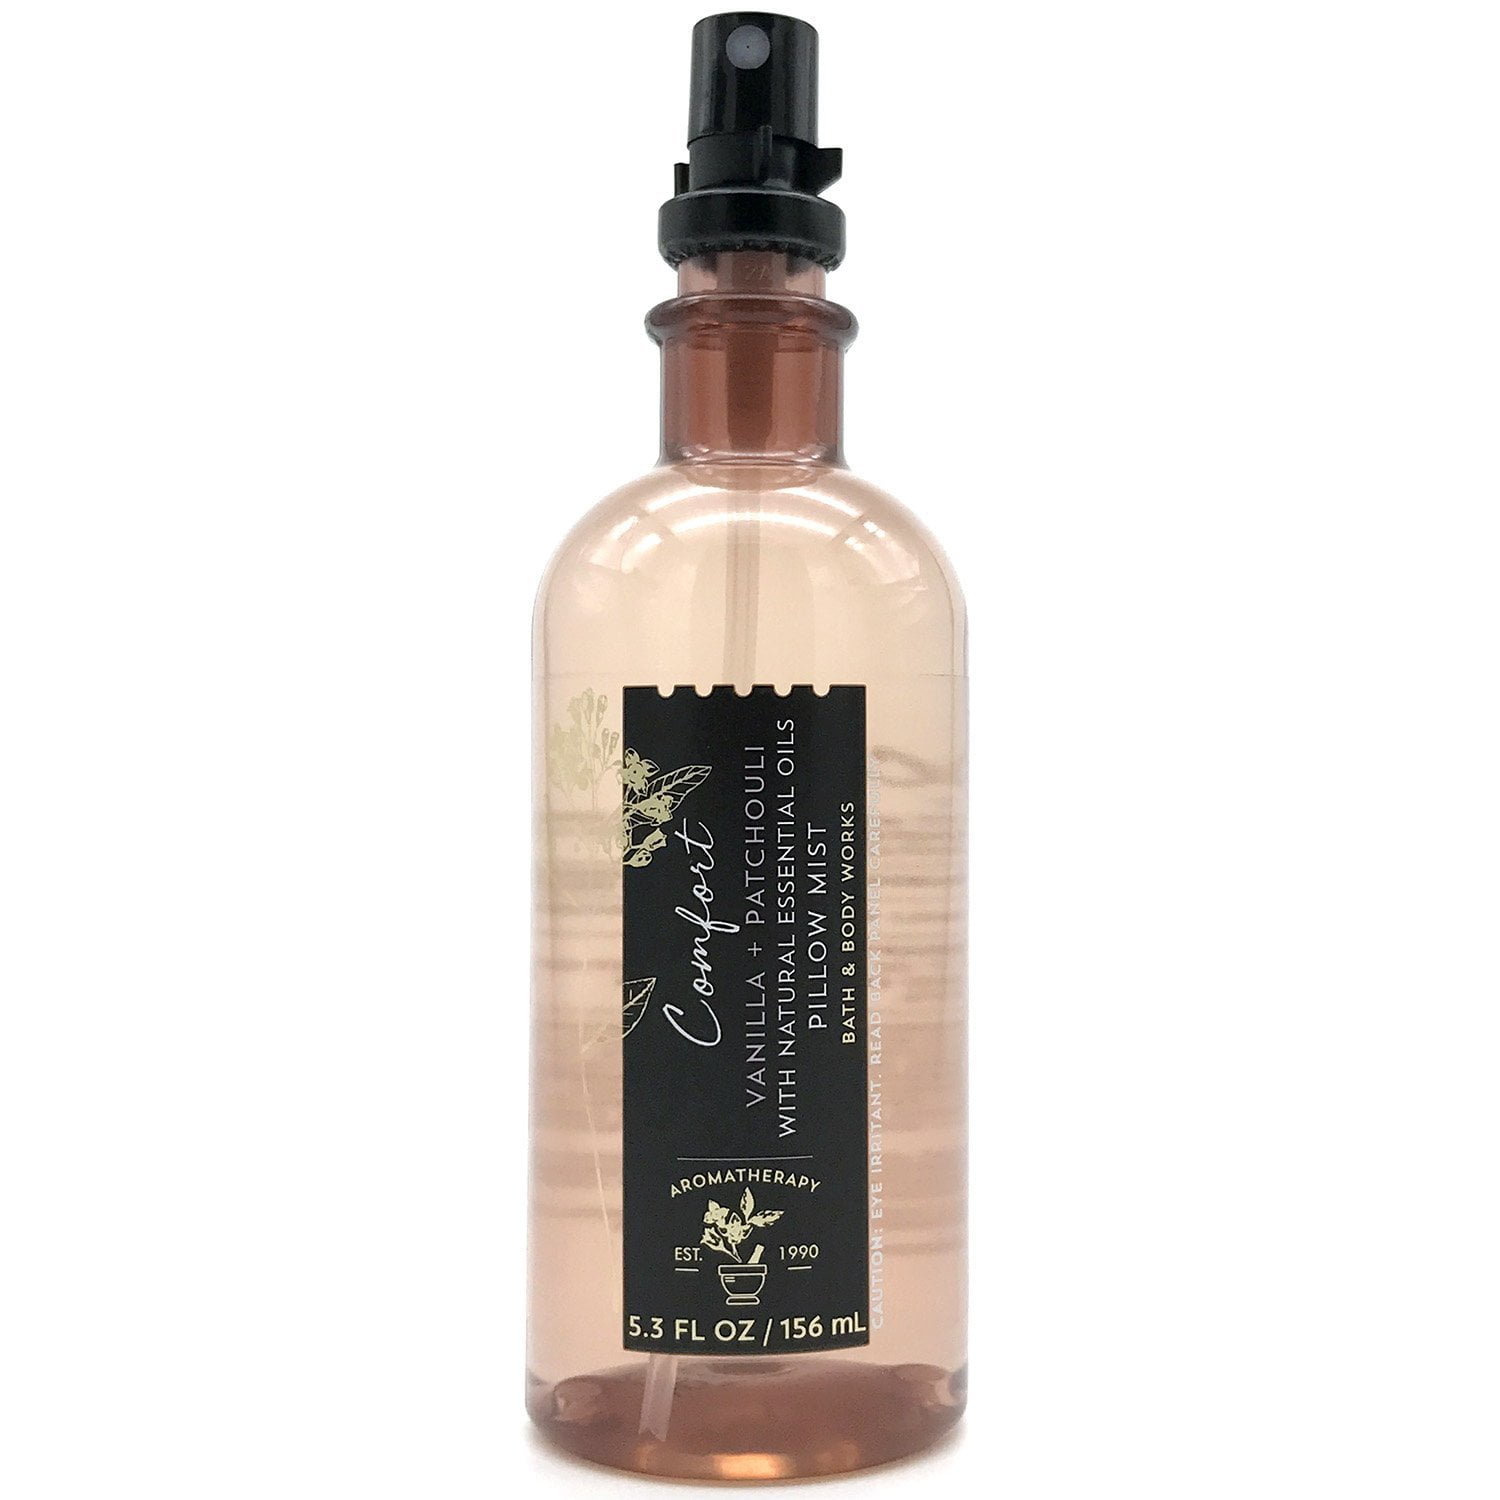 Bath and Body Works Aromatherapy Pillow Mist with Natural Essential ...